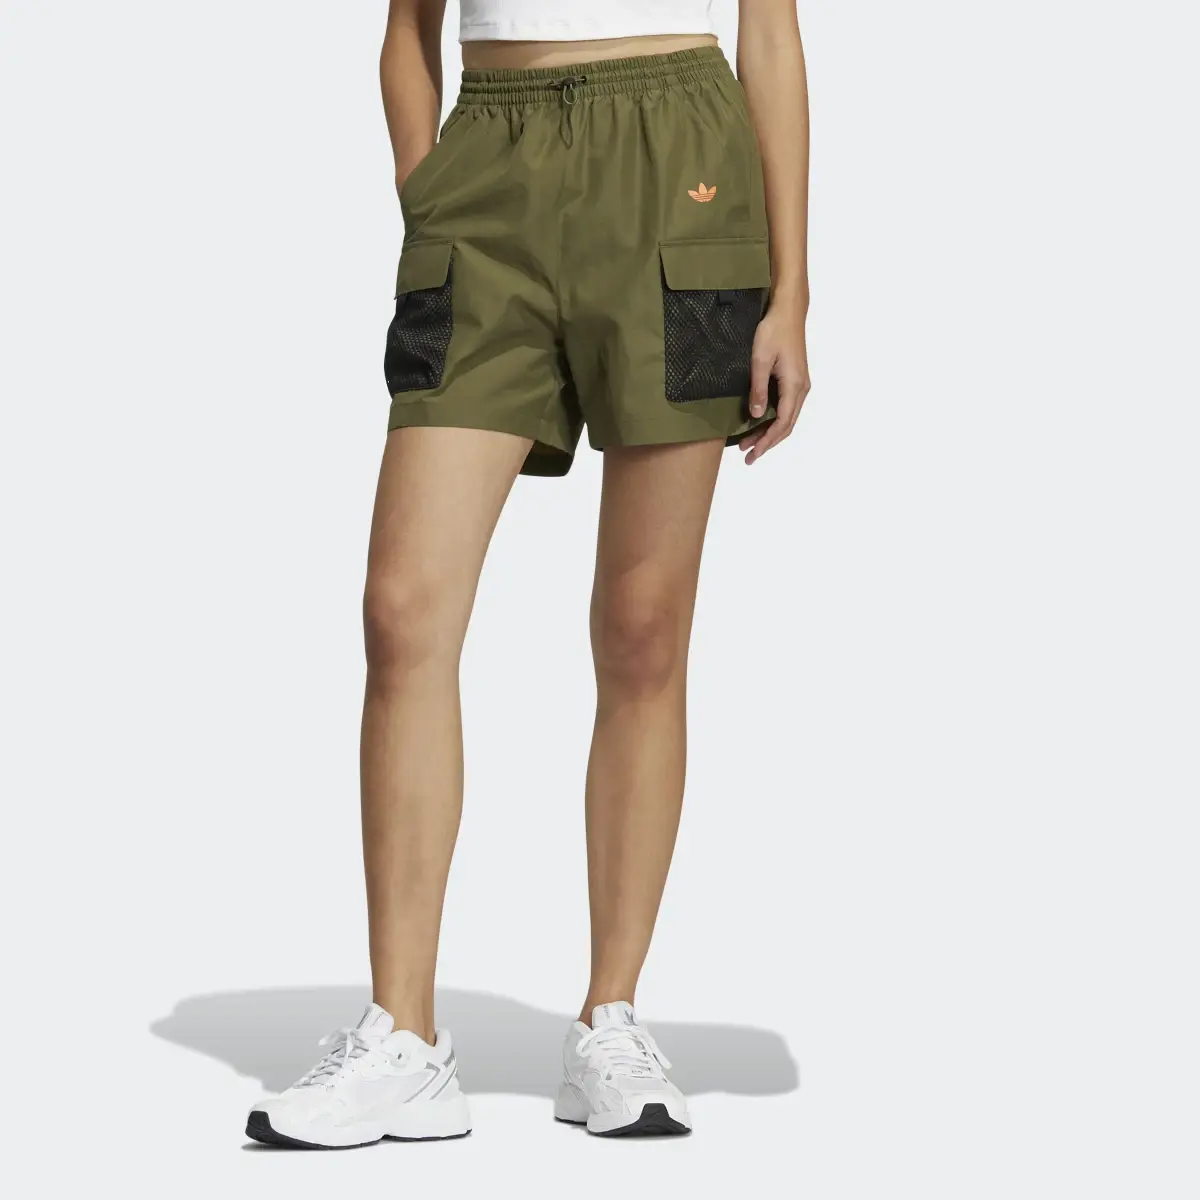 Adidas Outdoor Graphic Shorts. 1